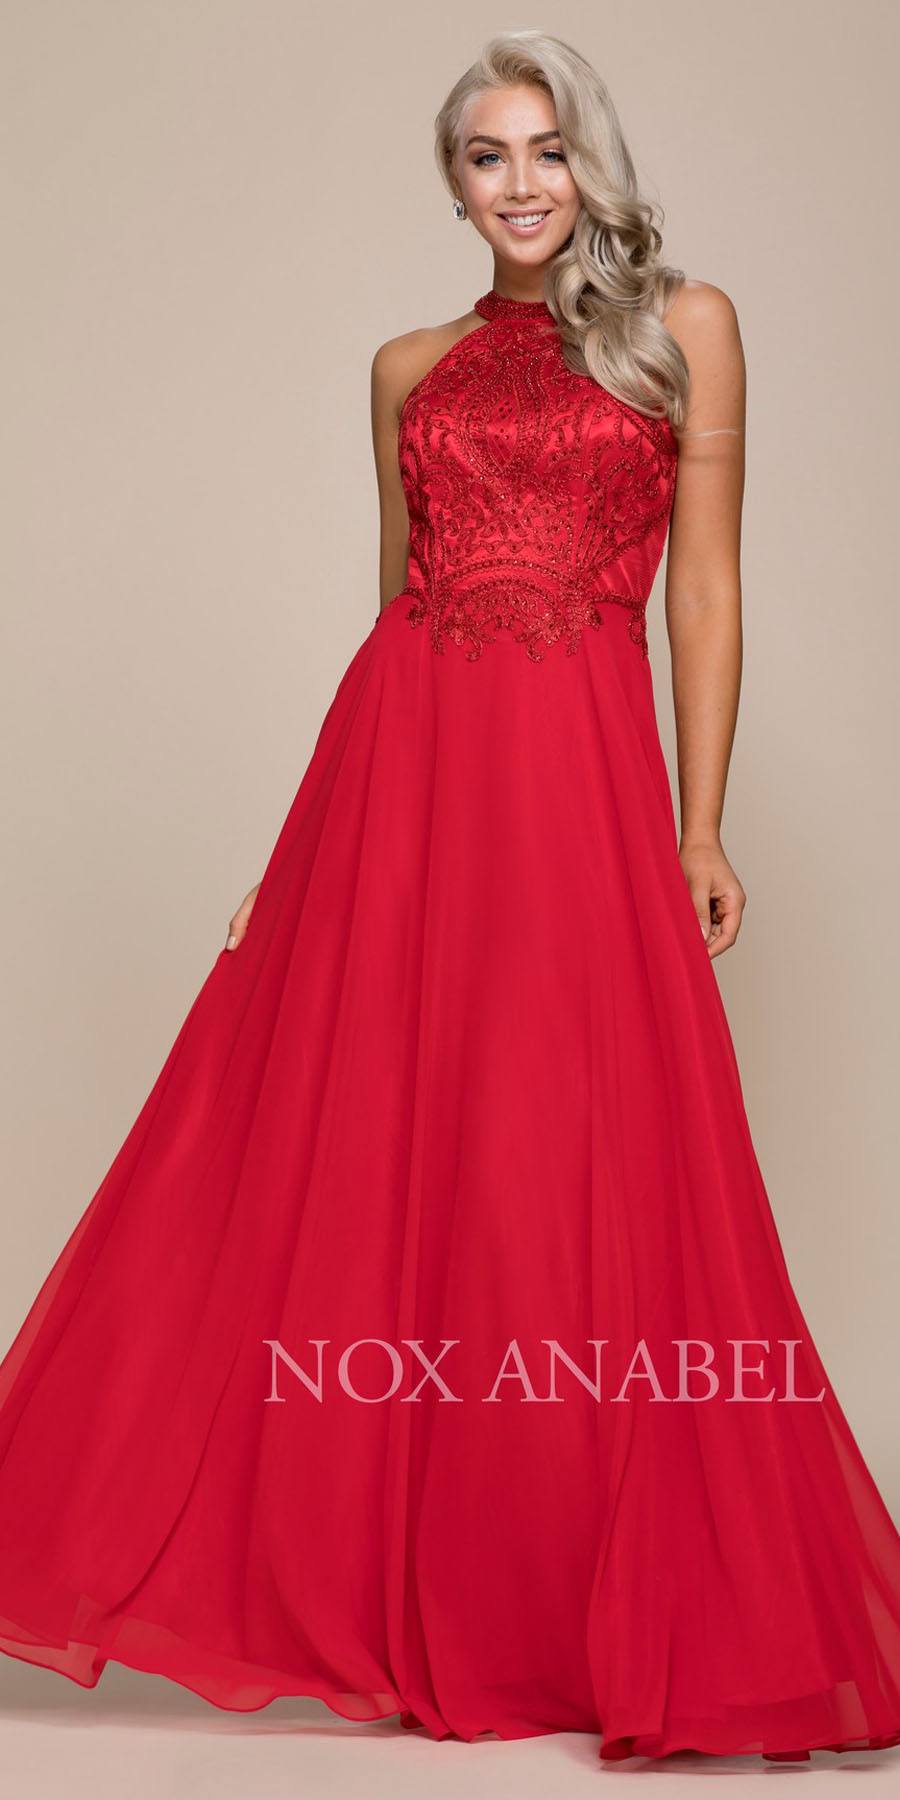 Red High Neck Embroidered Long Prom Dress Cut Out Back 